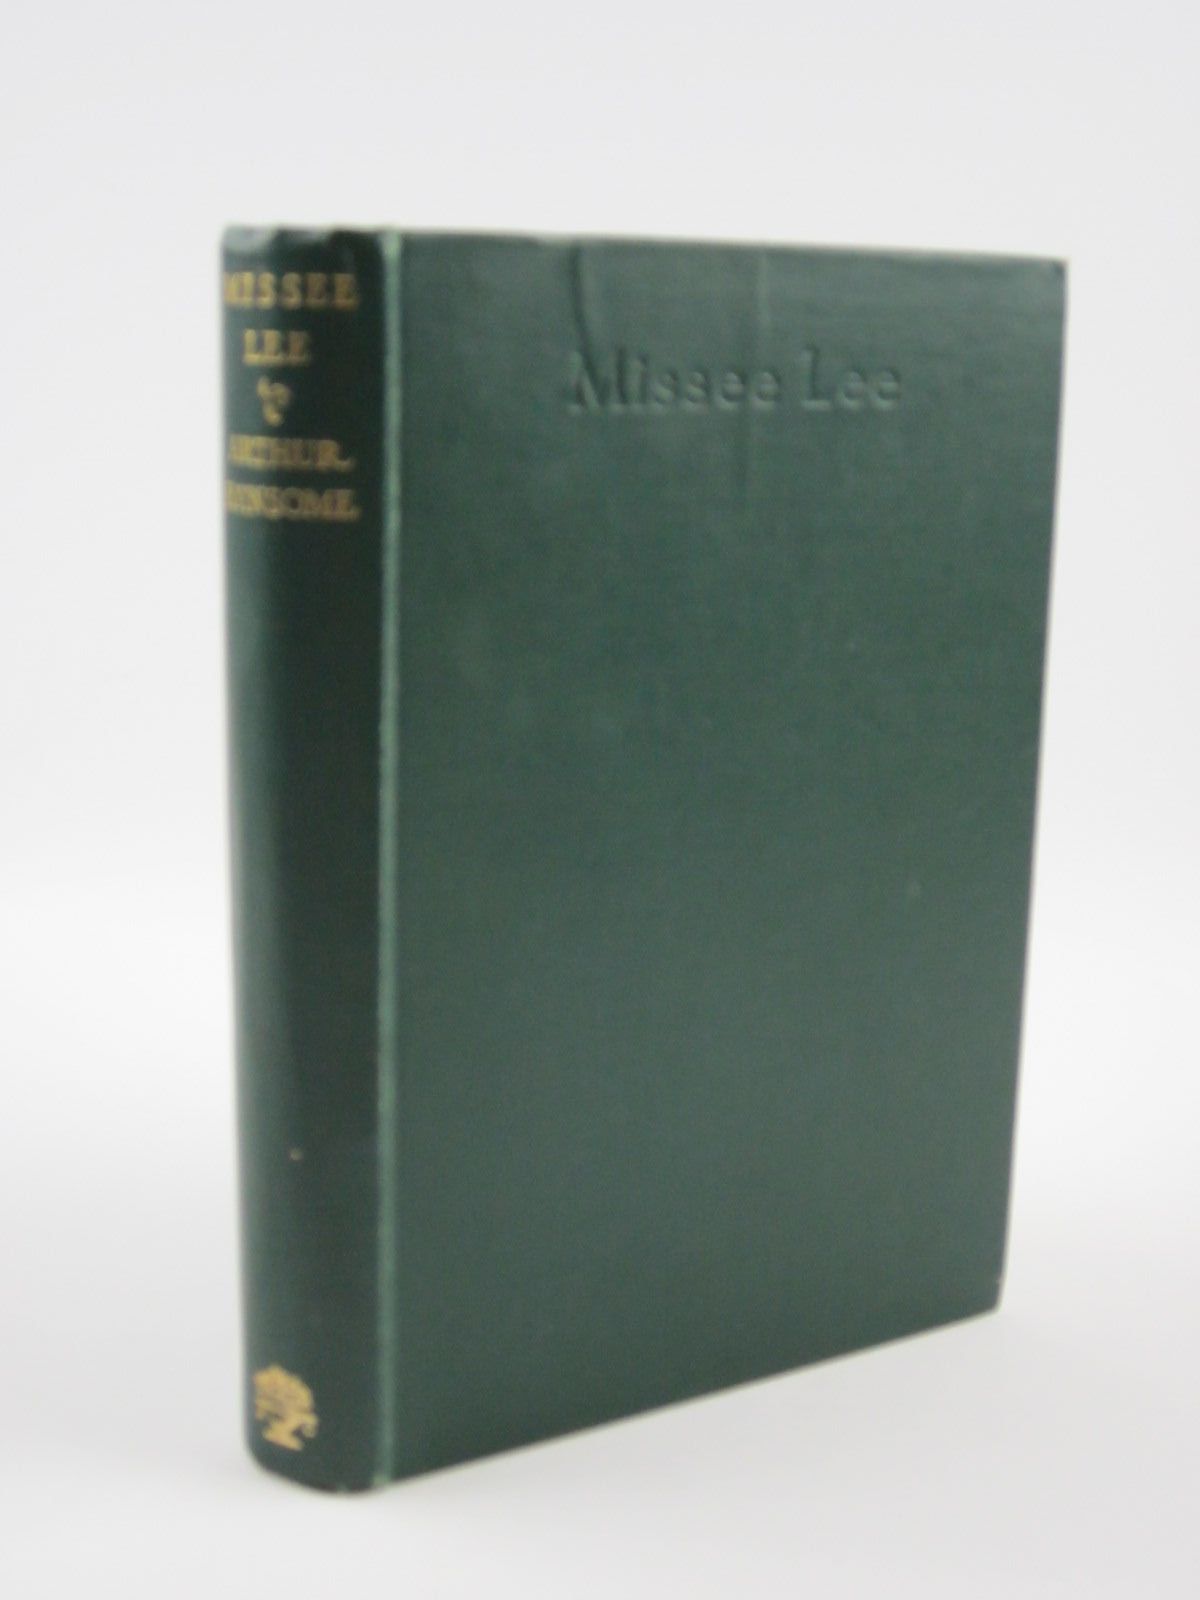 Photo of MISSEE LEE written by Ransome, Arthur illustrated by Ransome, Arthur published by Jonathan Cape (STOCK CODE: 1401472)  for sale by Stella & Rose's Books